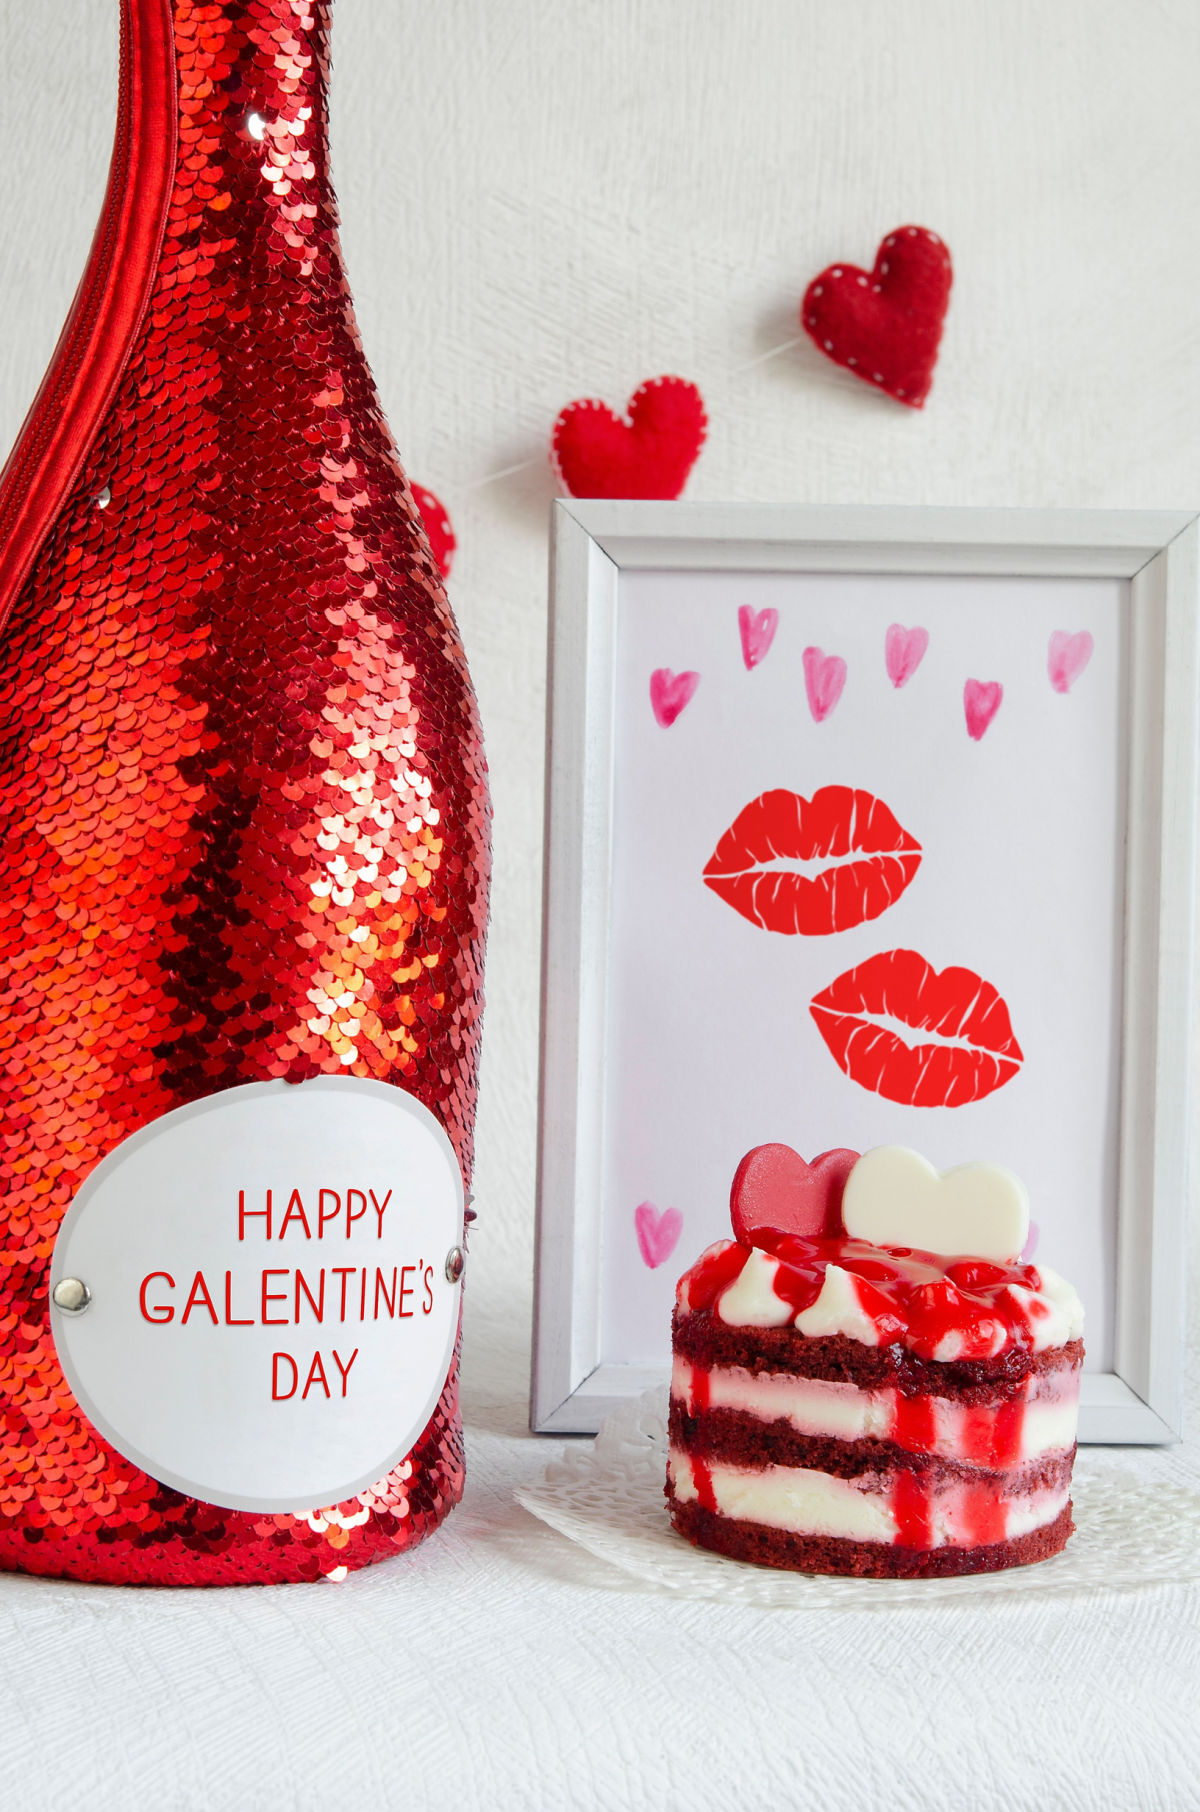 Whether you´re in a relationship or not, celebrating Galentine´s day with your friends is a good way to remind yourself to cherish the women in your life.